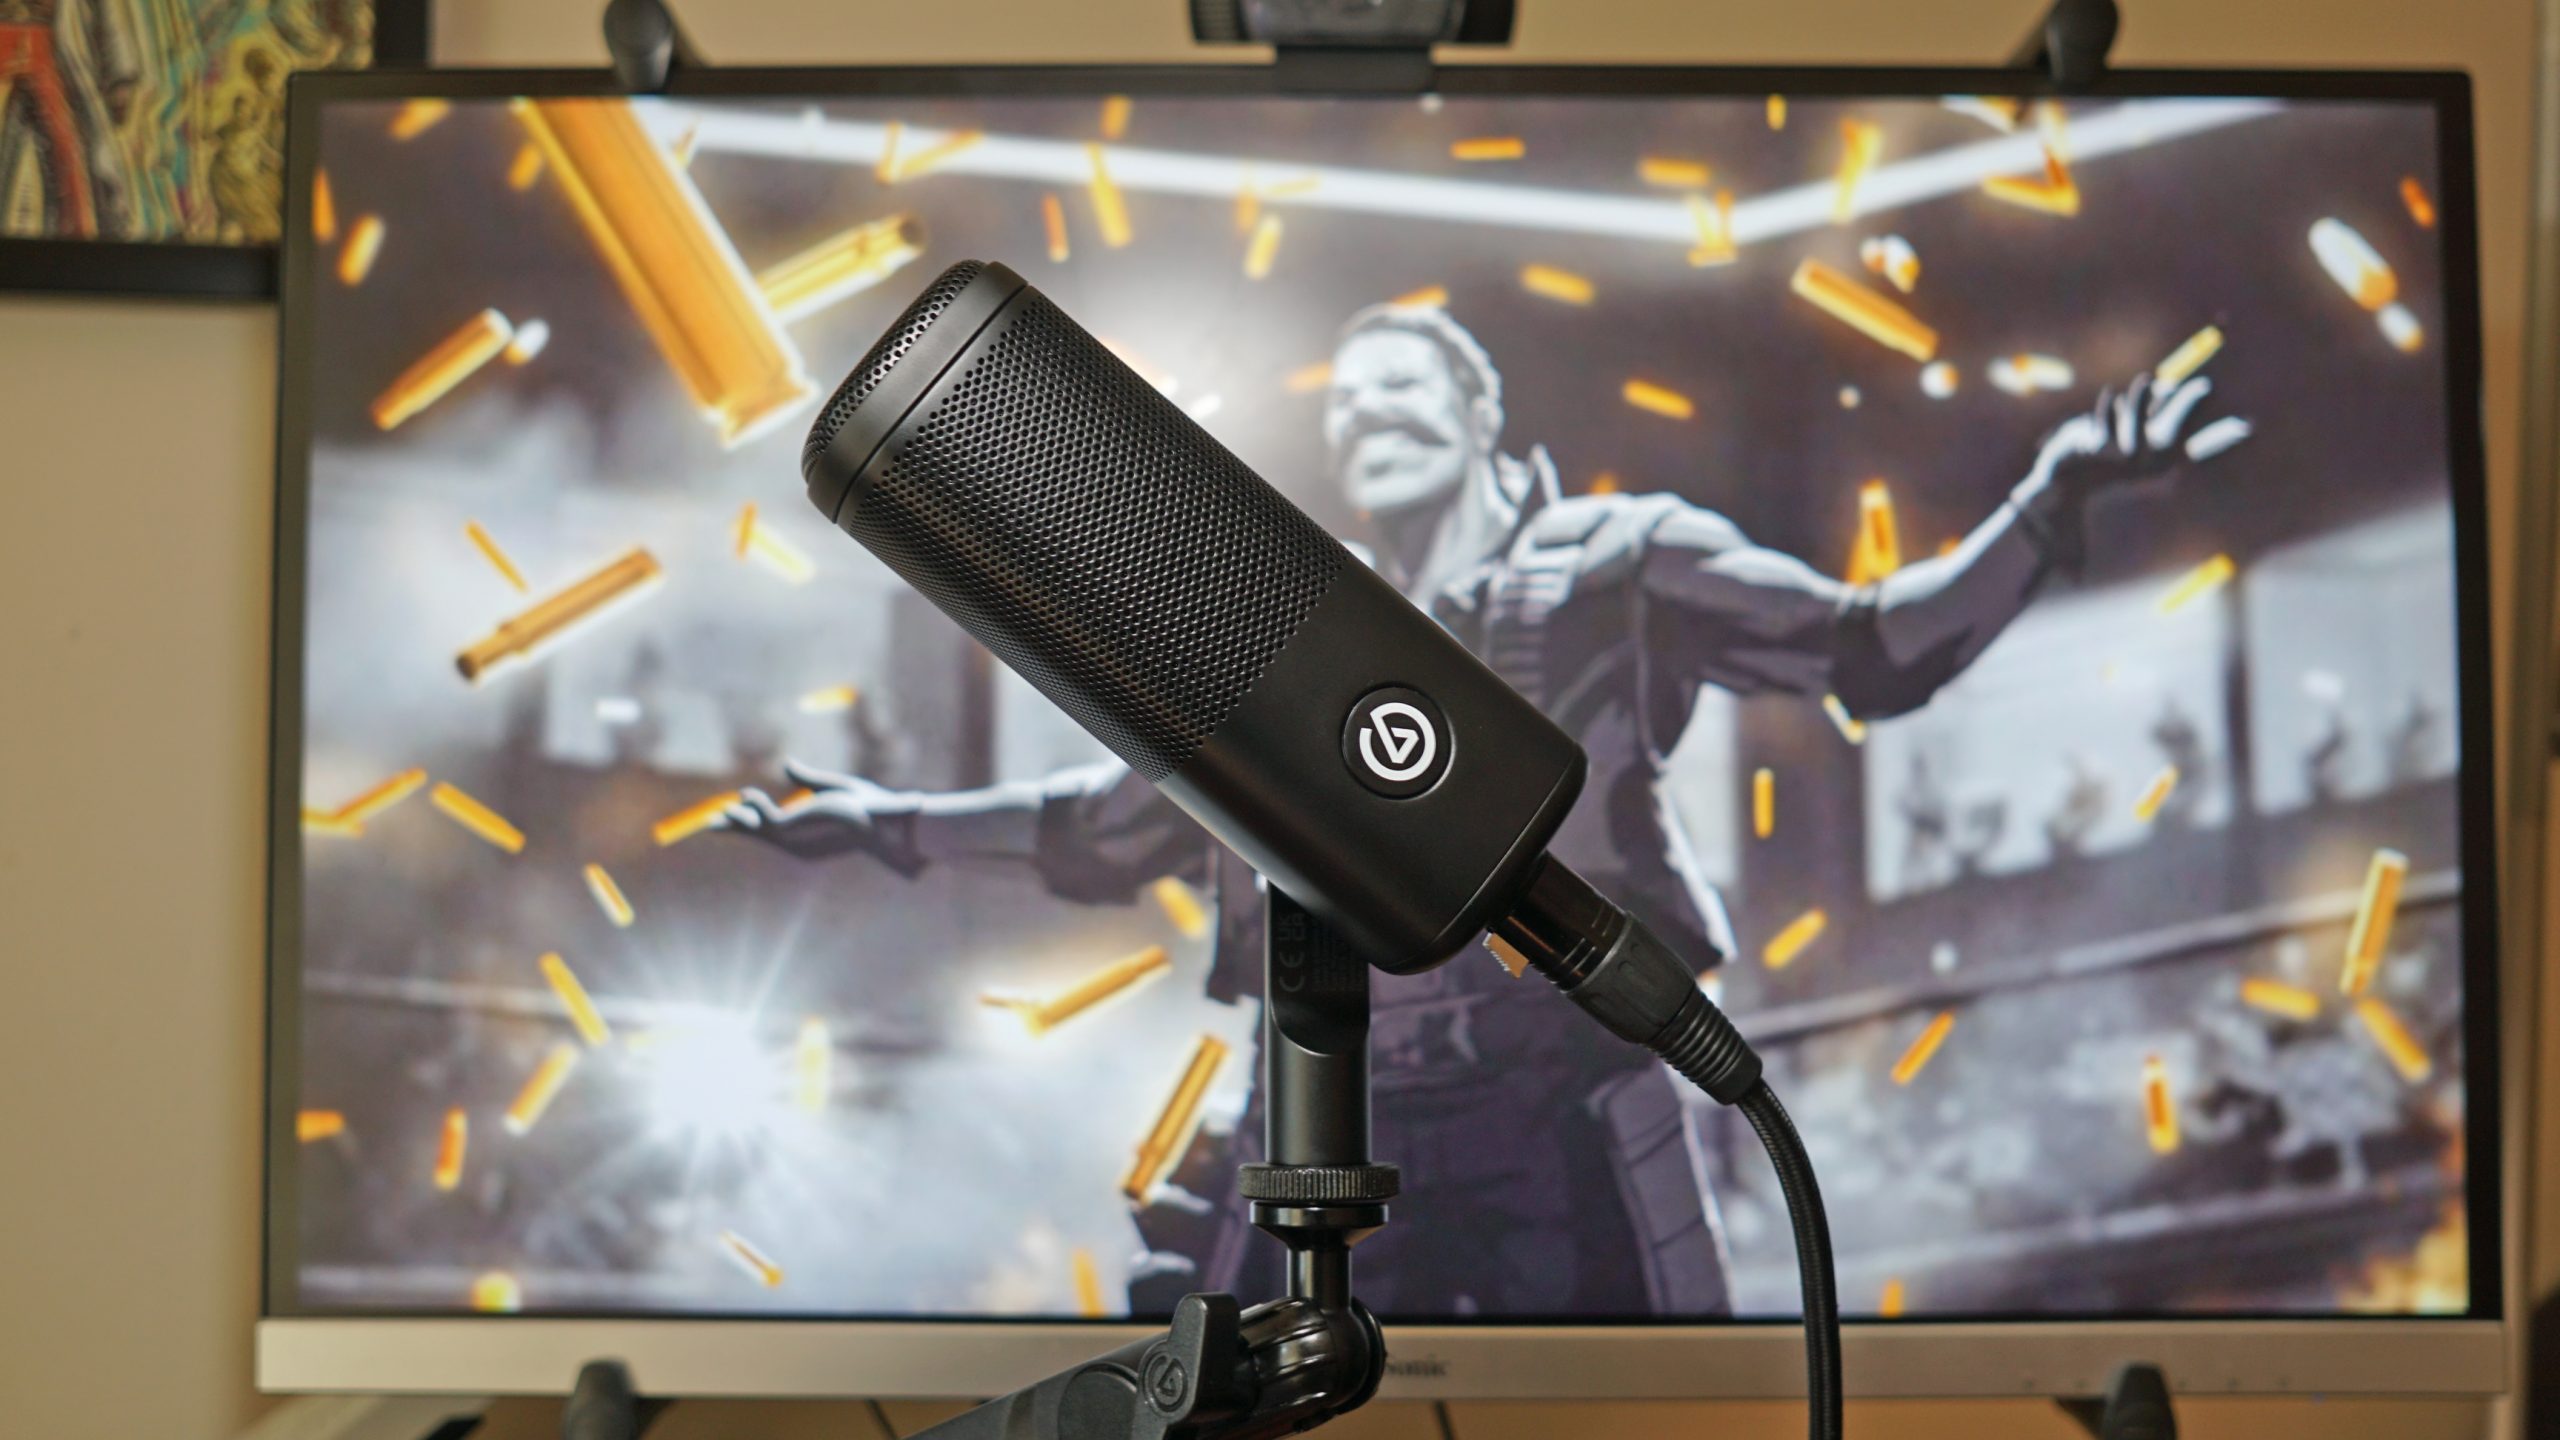 Elgato Wave DX review: Professional streaming and podcast microphone